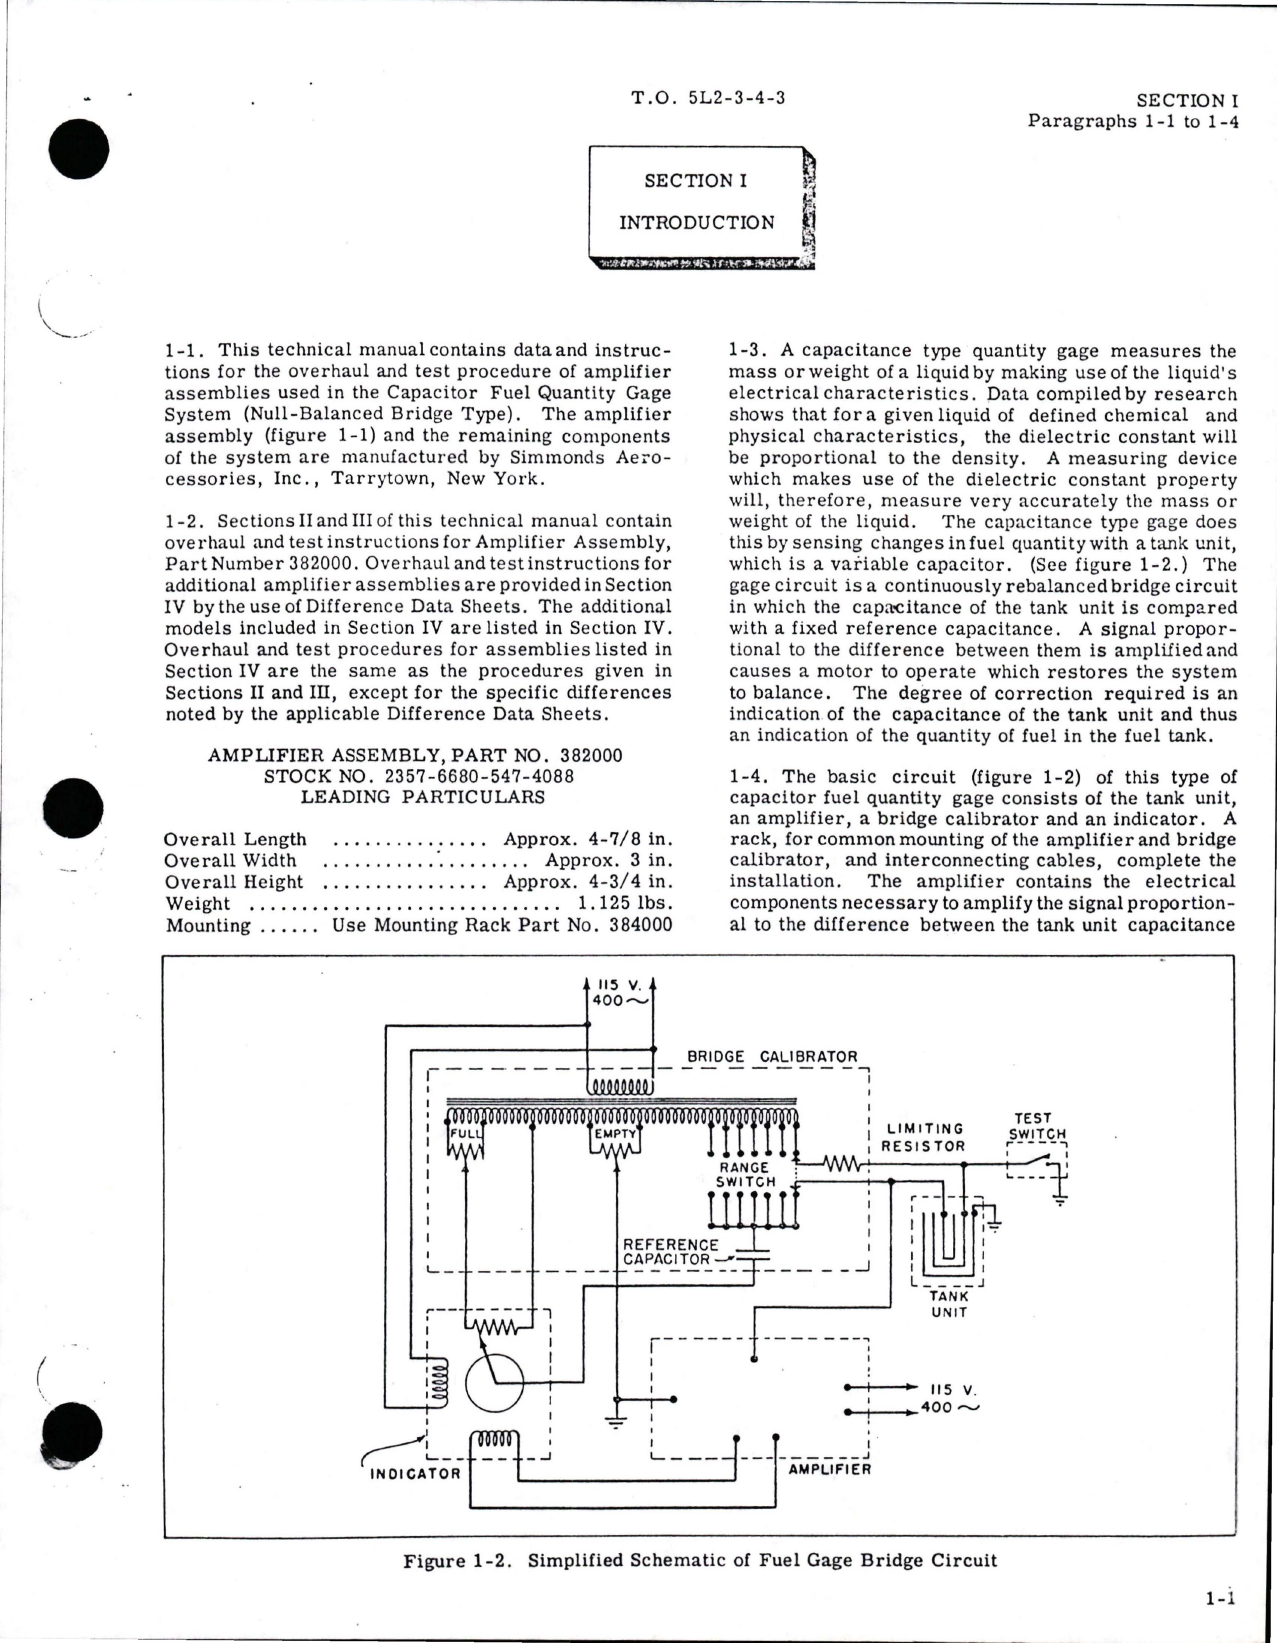 Sample page 5 from AirCorps Library document: Instrument Flying Handbook 